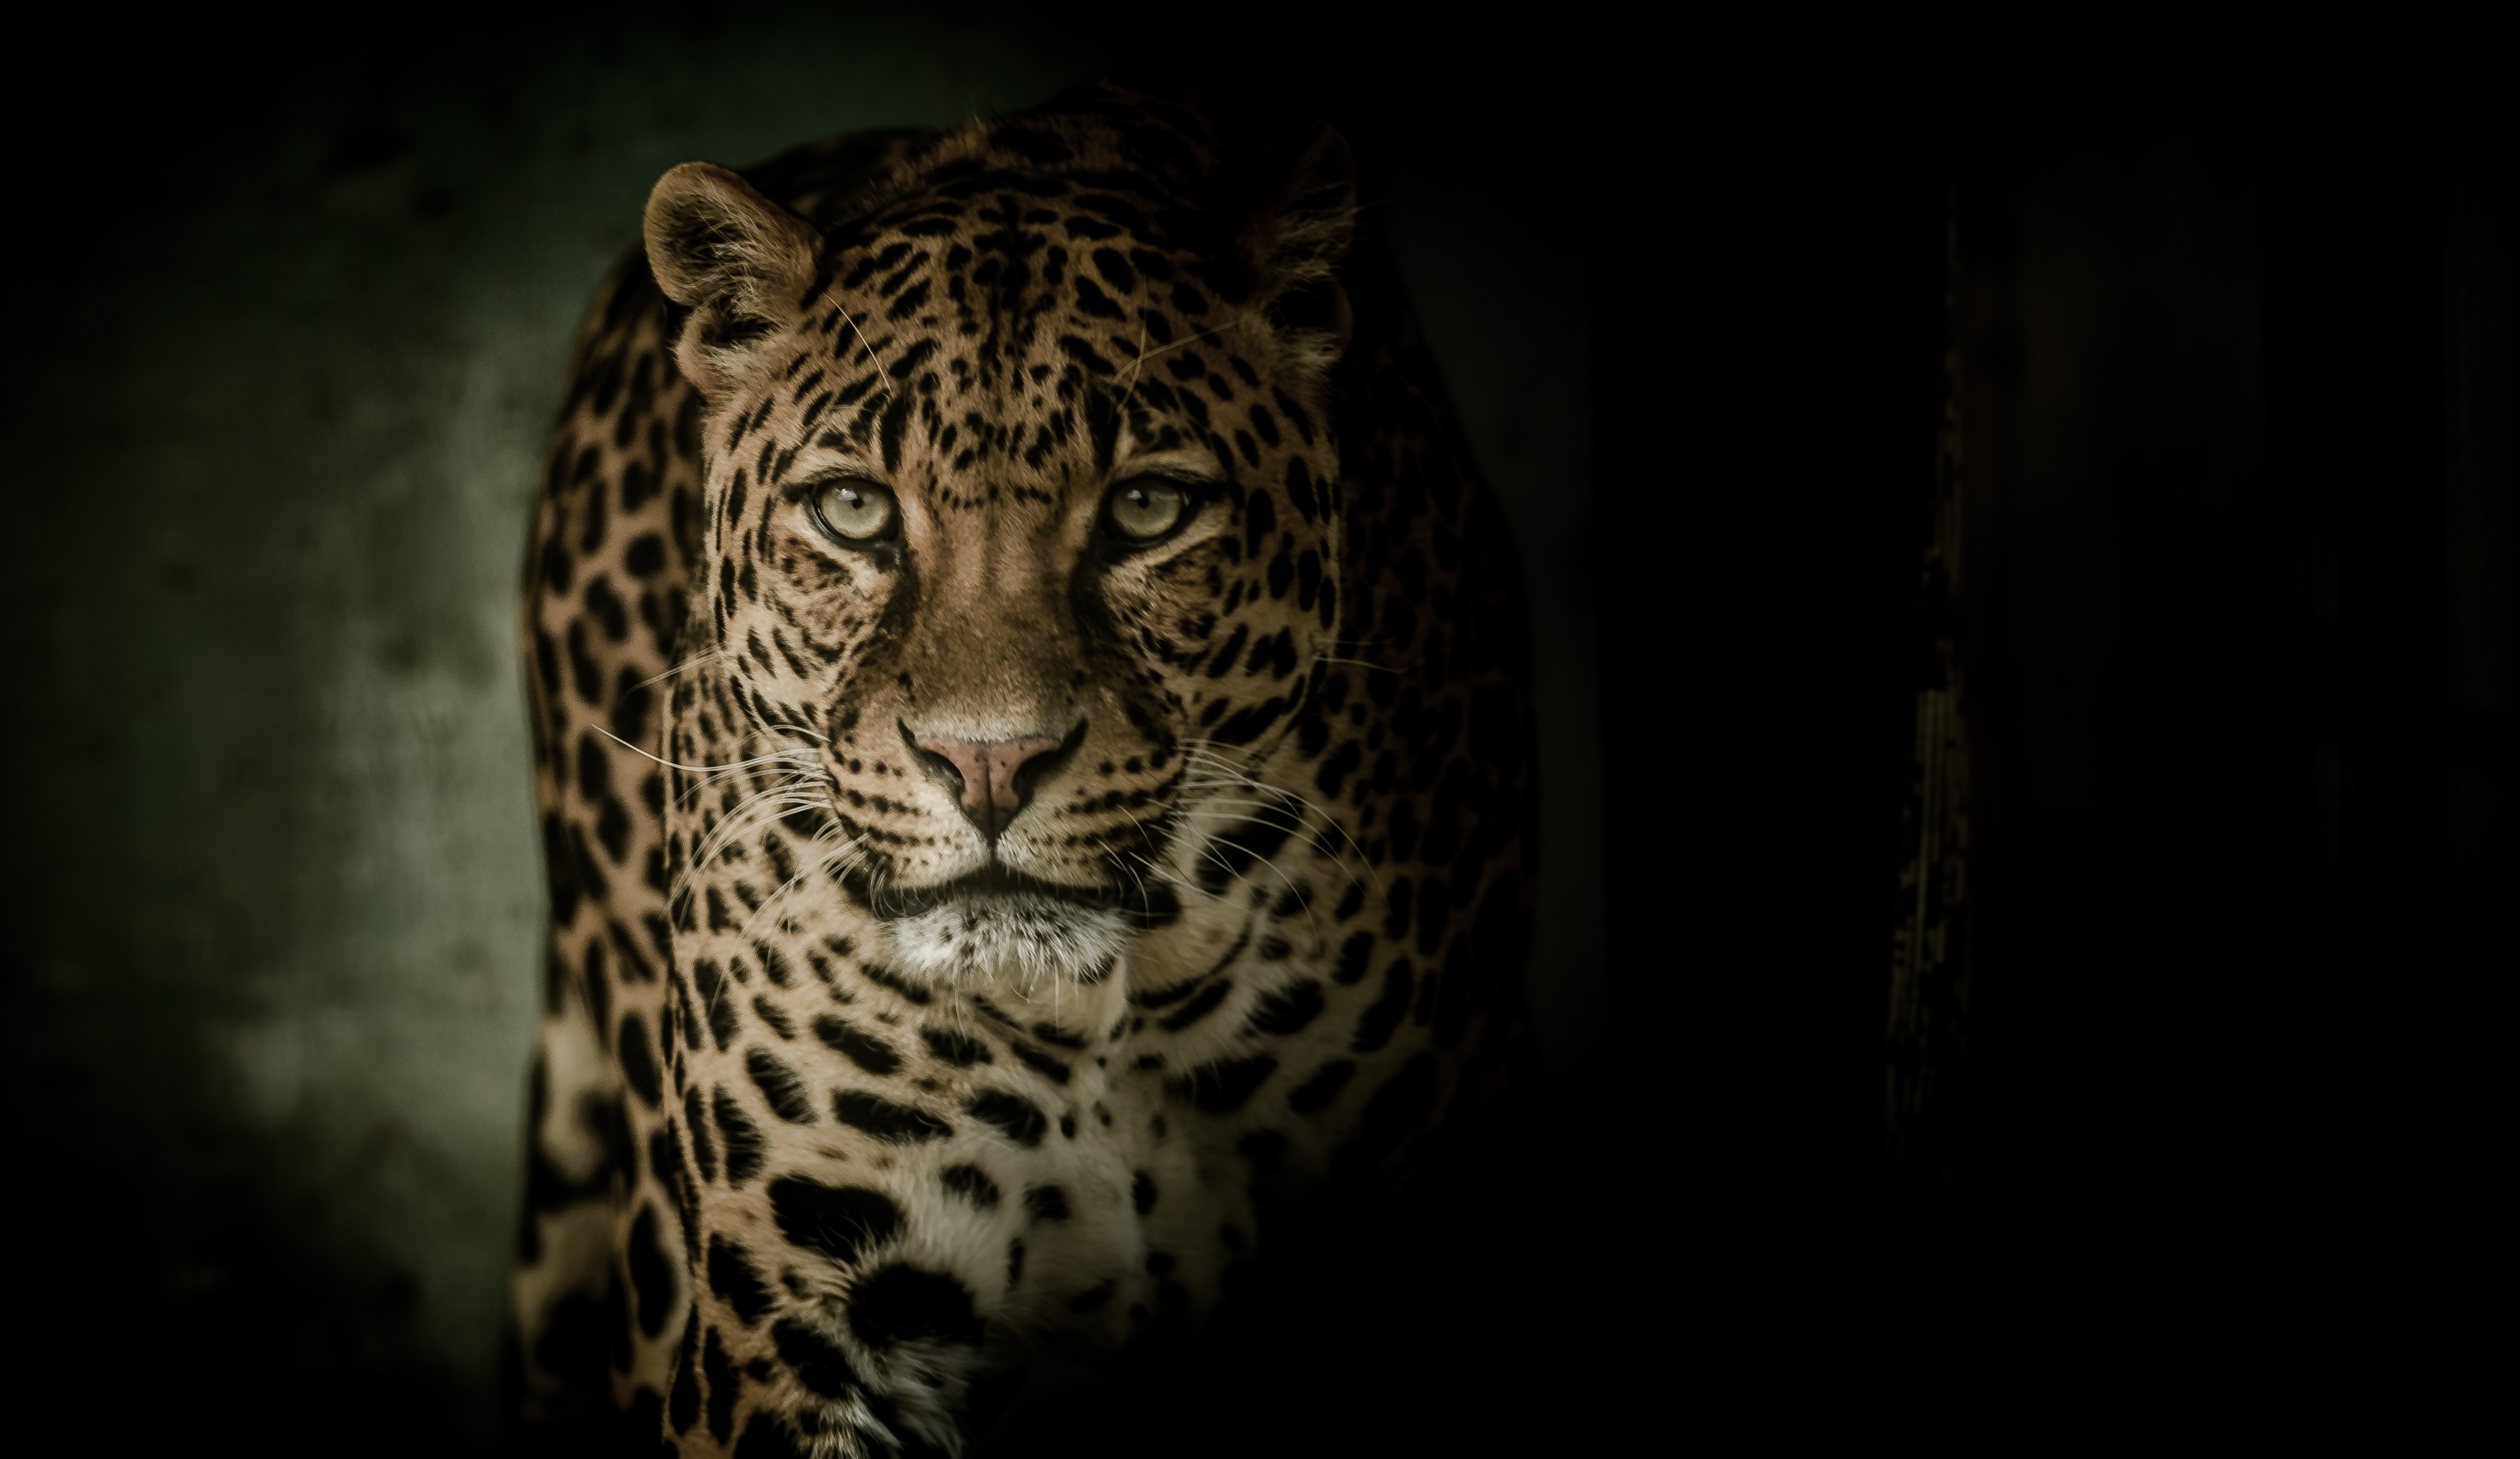 91336 download wallpaper animals, dark, leopard, predator, big cat, sight, opinion screensavers and pictures for free